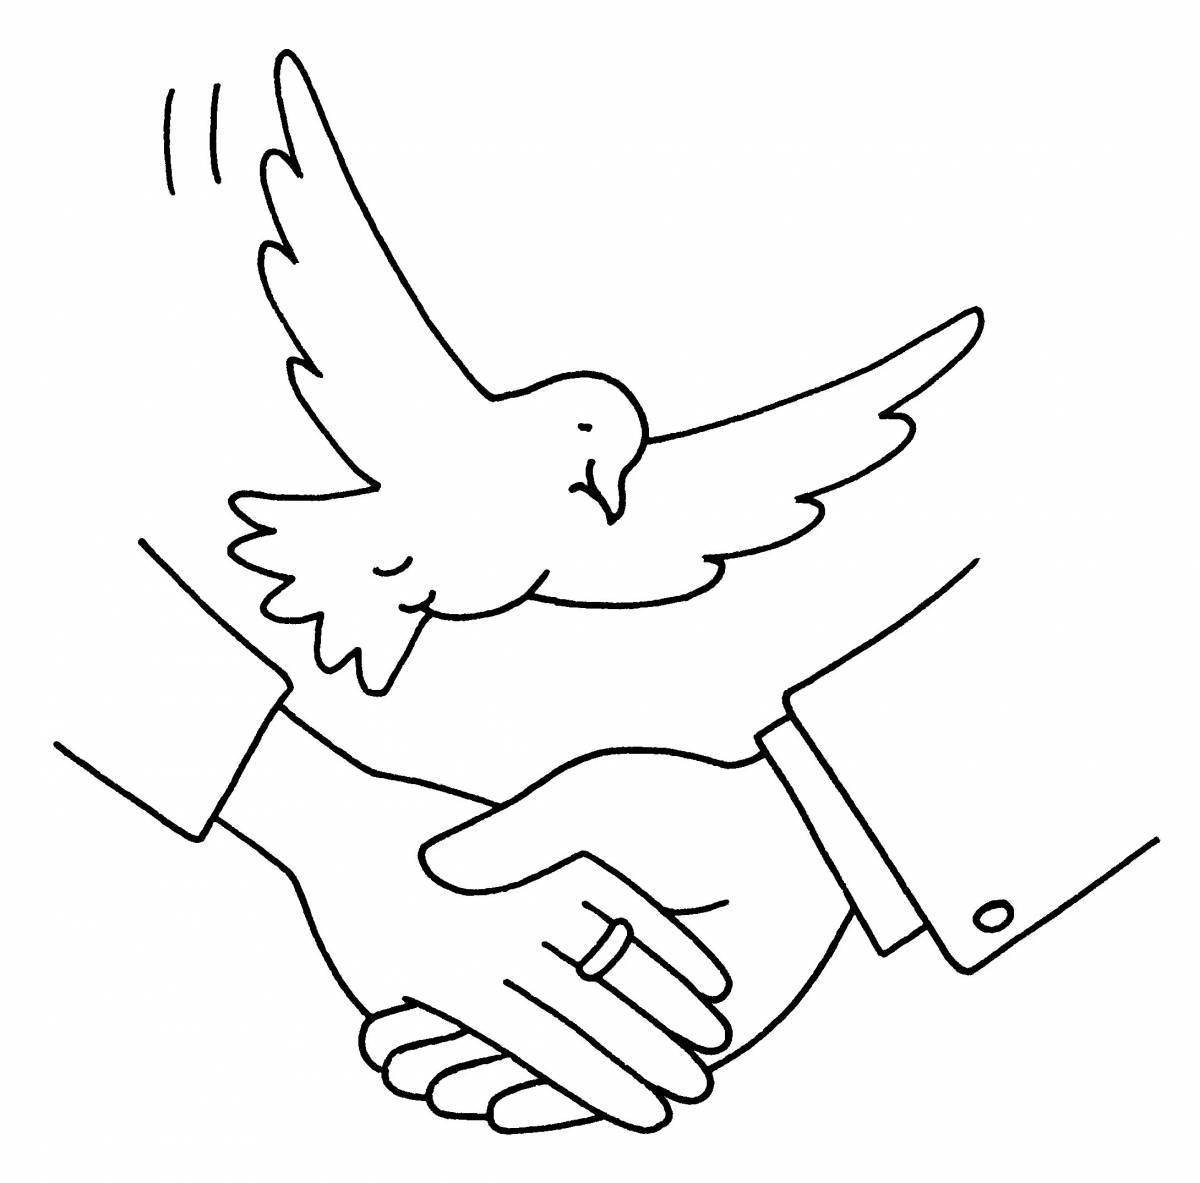 Dynamic drawing of world peace